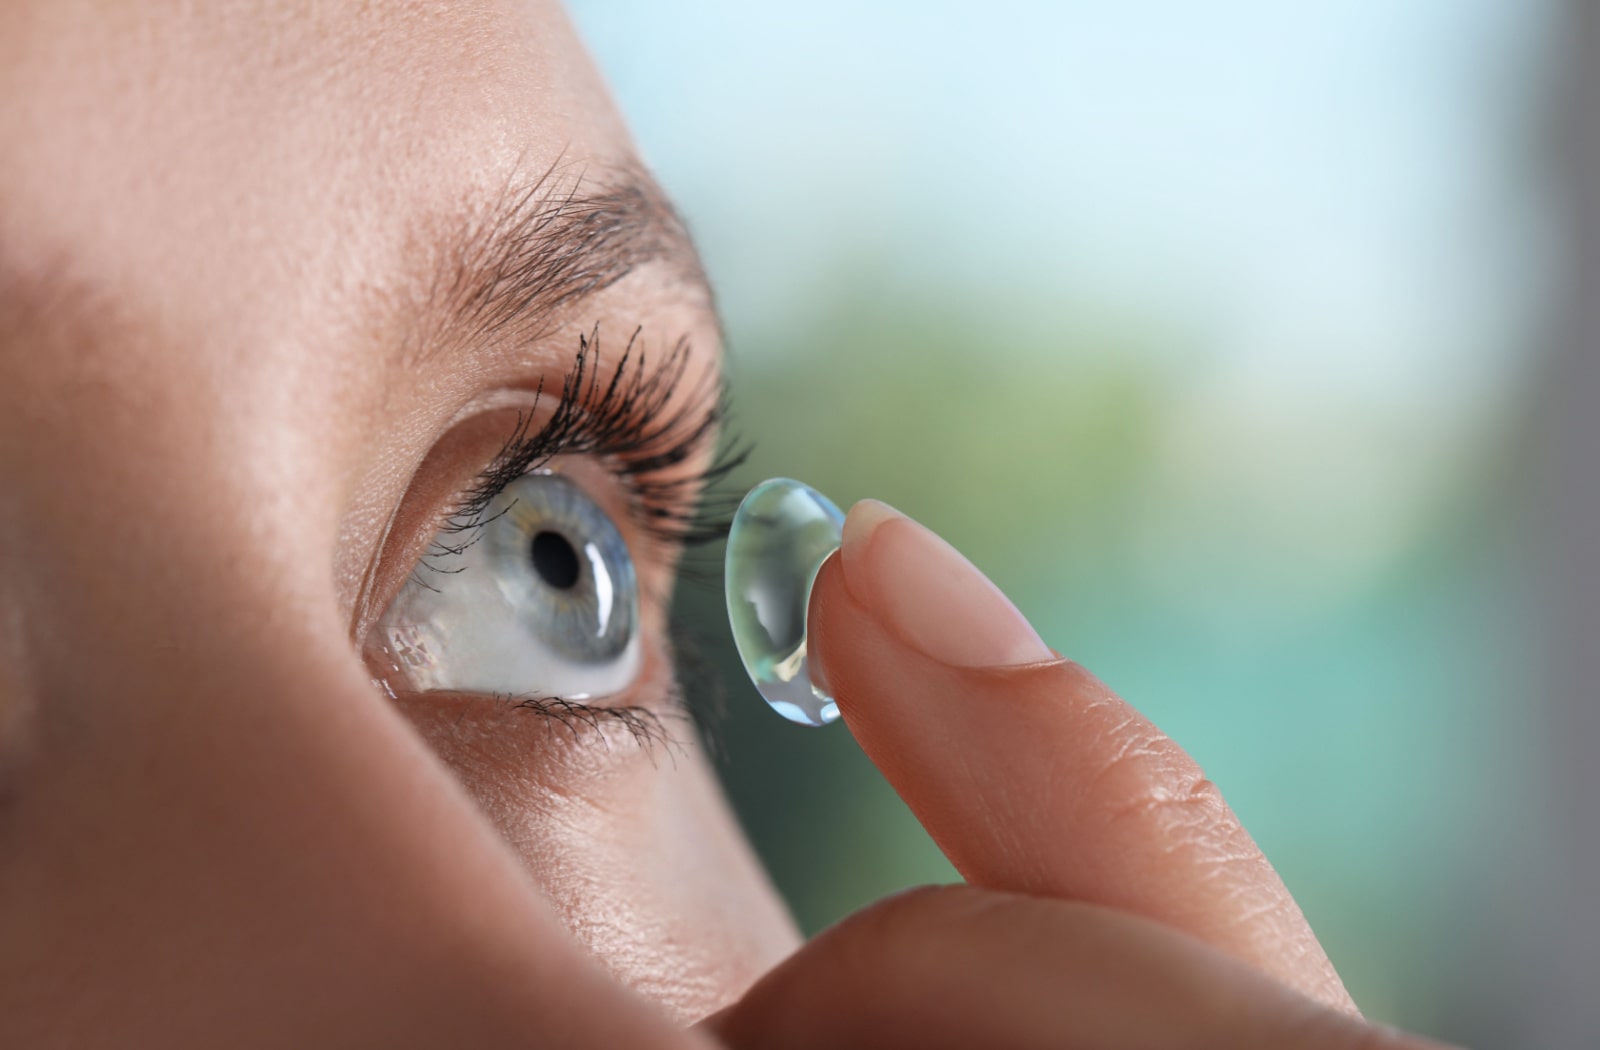 A woman uses her index finger to place a contact lens on her eye